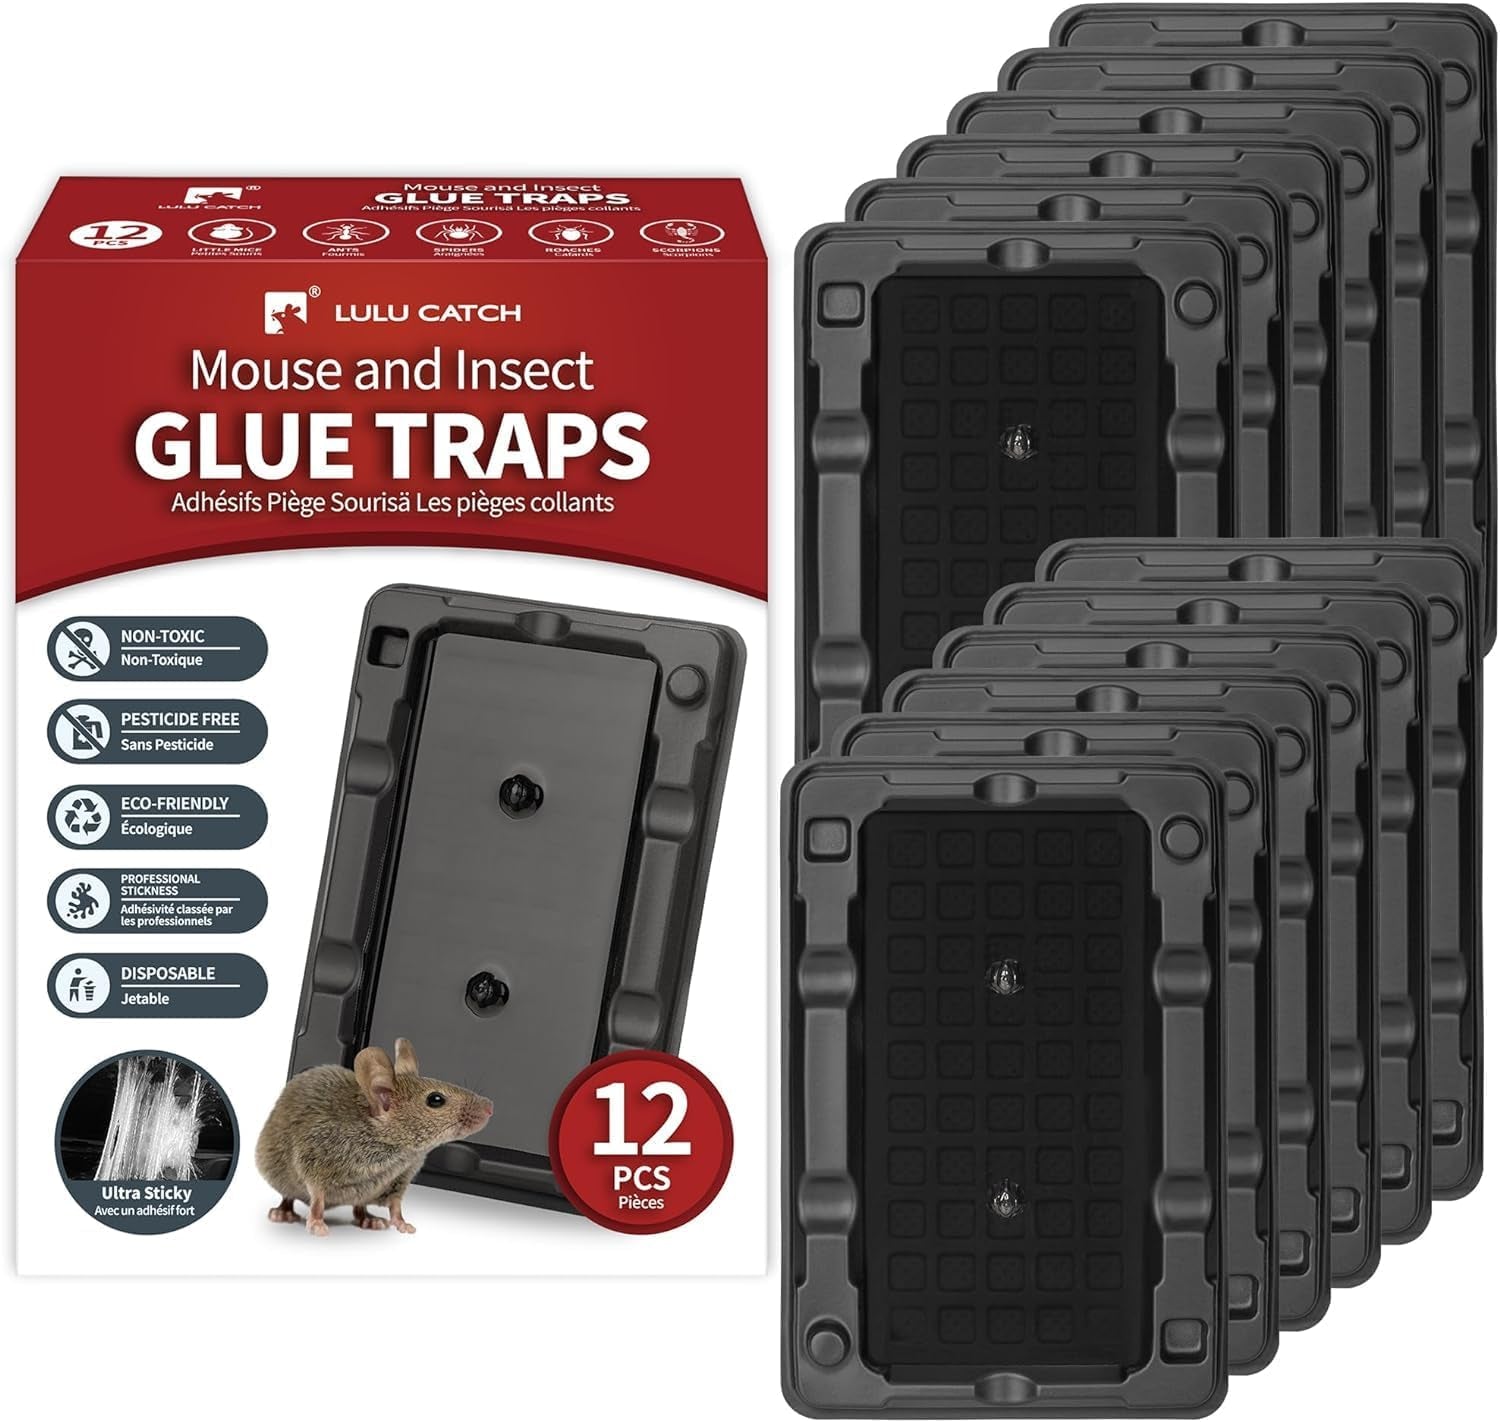 What makes these mouse traps reusable?